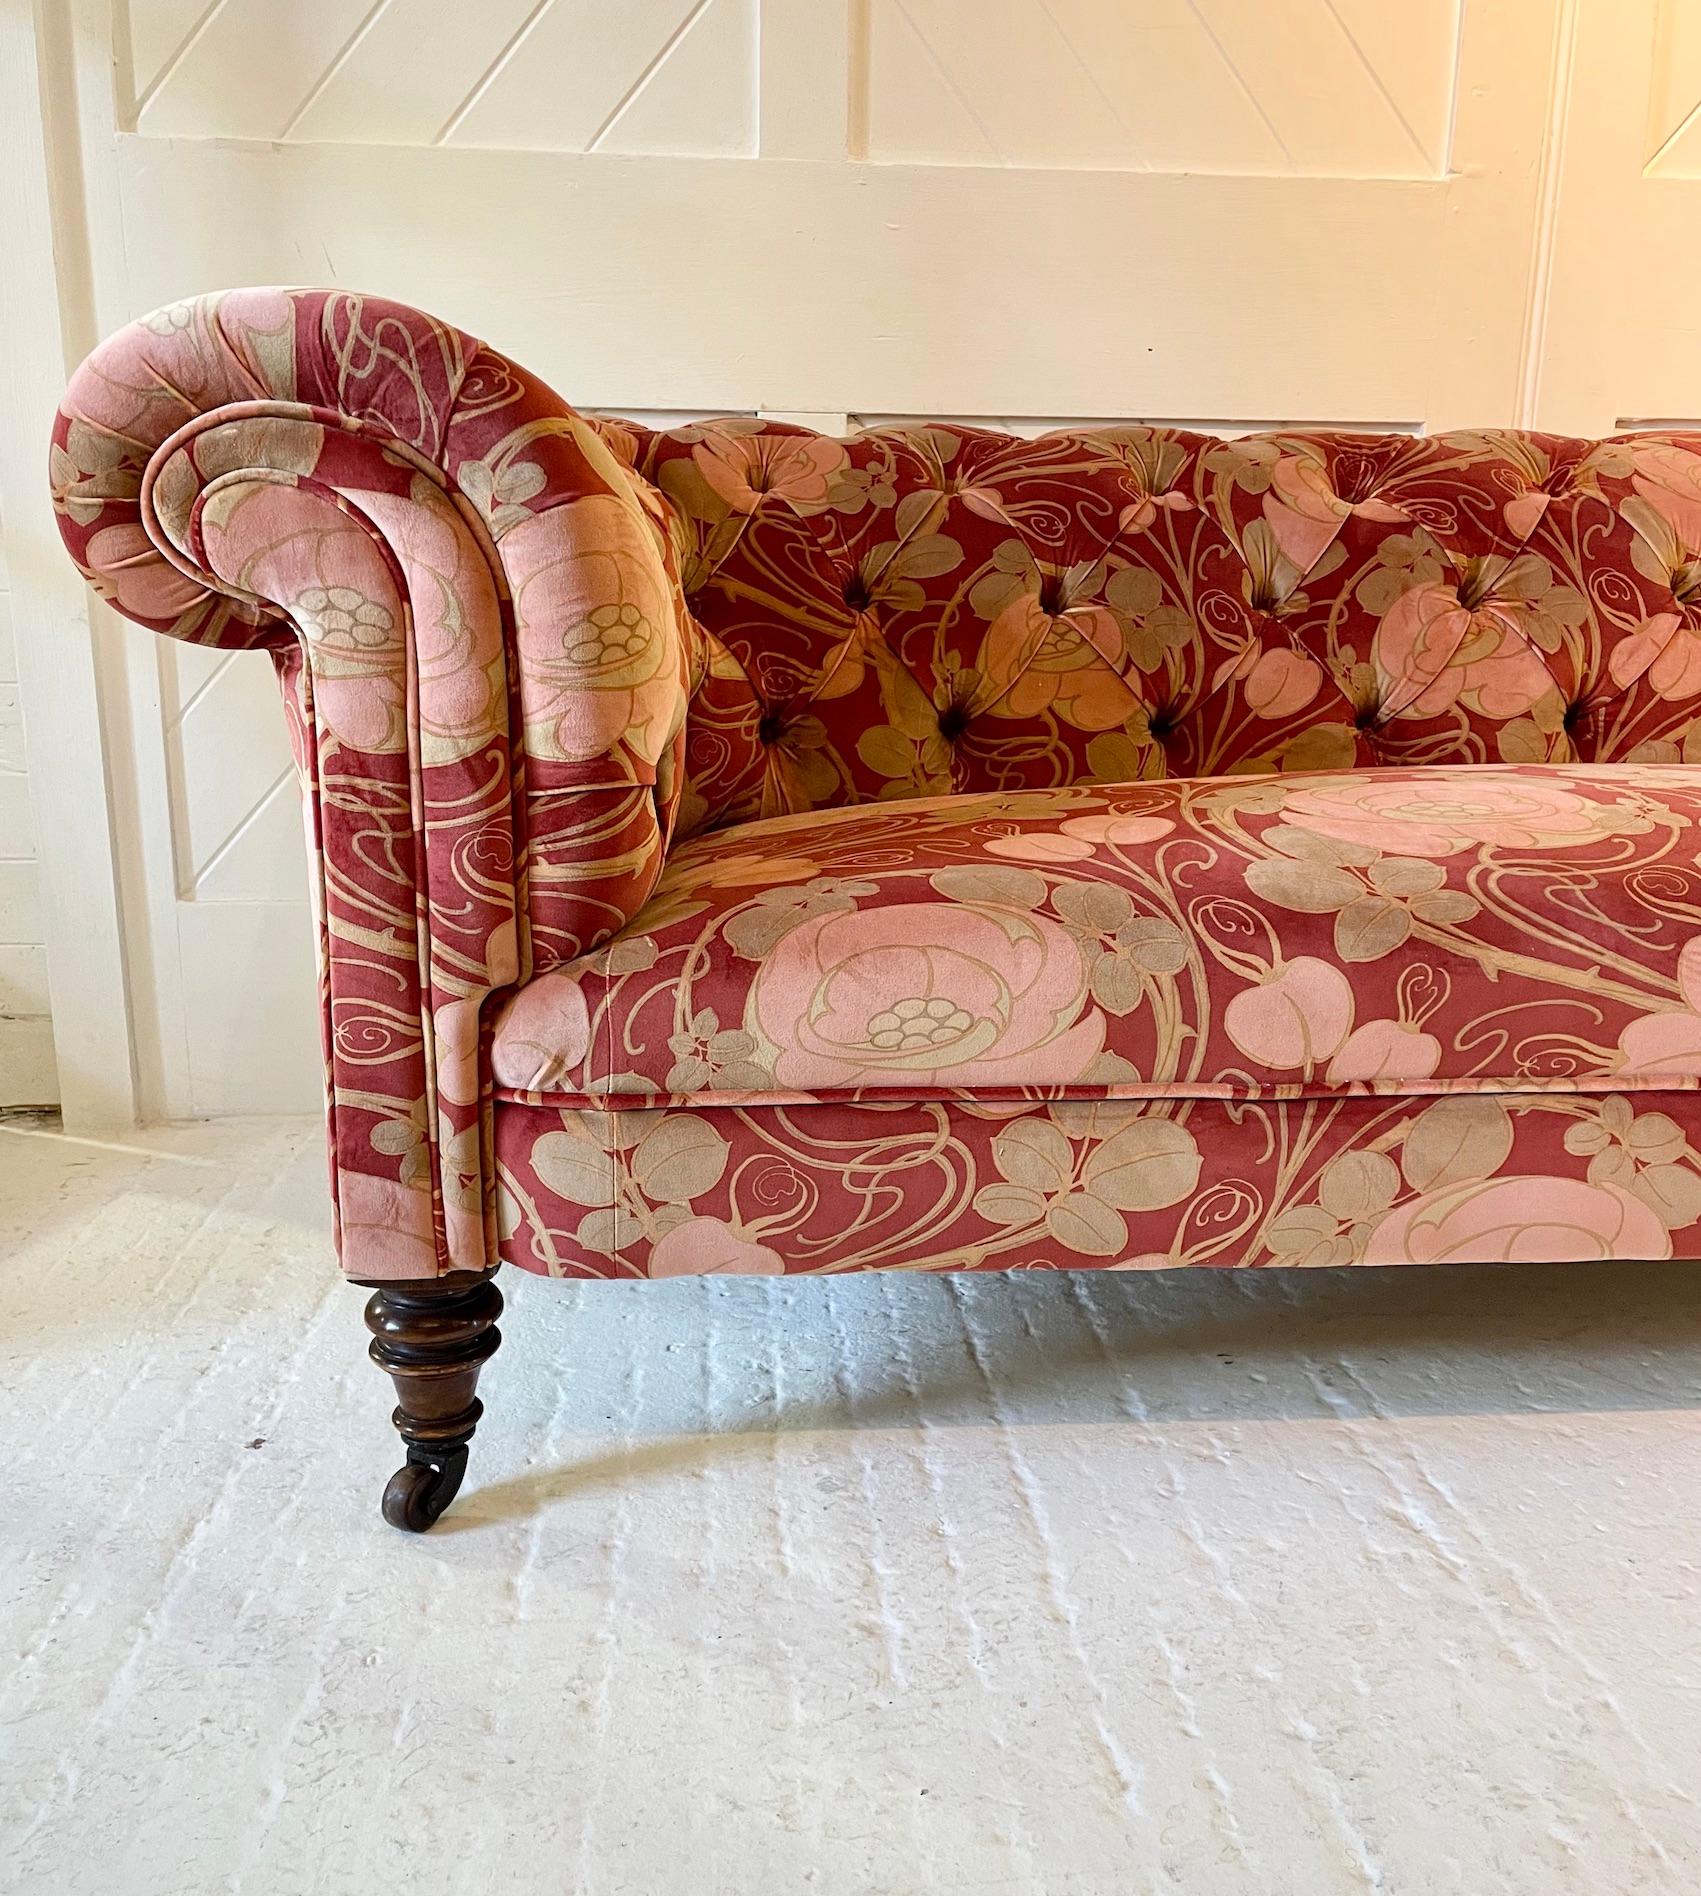 Victorian Chesterfield button-back settee
Traditionally re-upholstered 
Raised with lignum vitae and cast-iron castors
Circa 1890
Covered in ‘Glasgow Rose’ cotton velvet ‘Claret’
Fabric by Patch Rogers Design
Rosebank Fabrics

Patch is proud